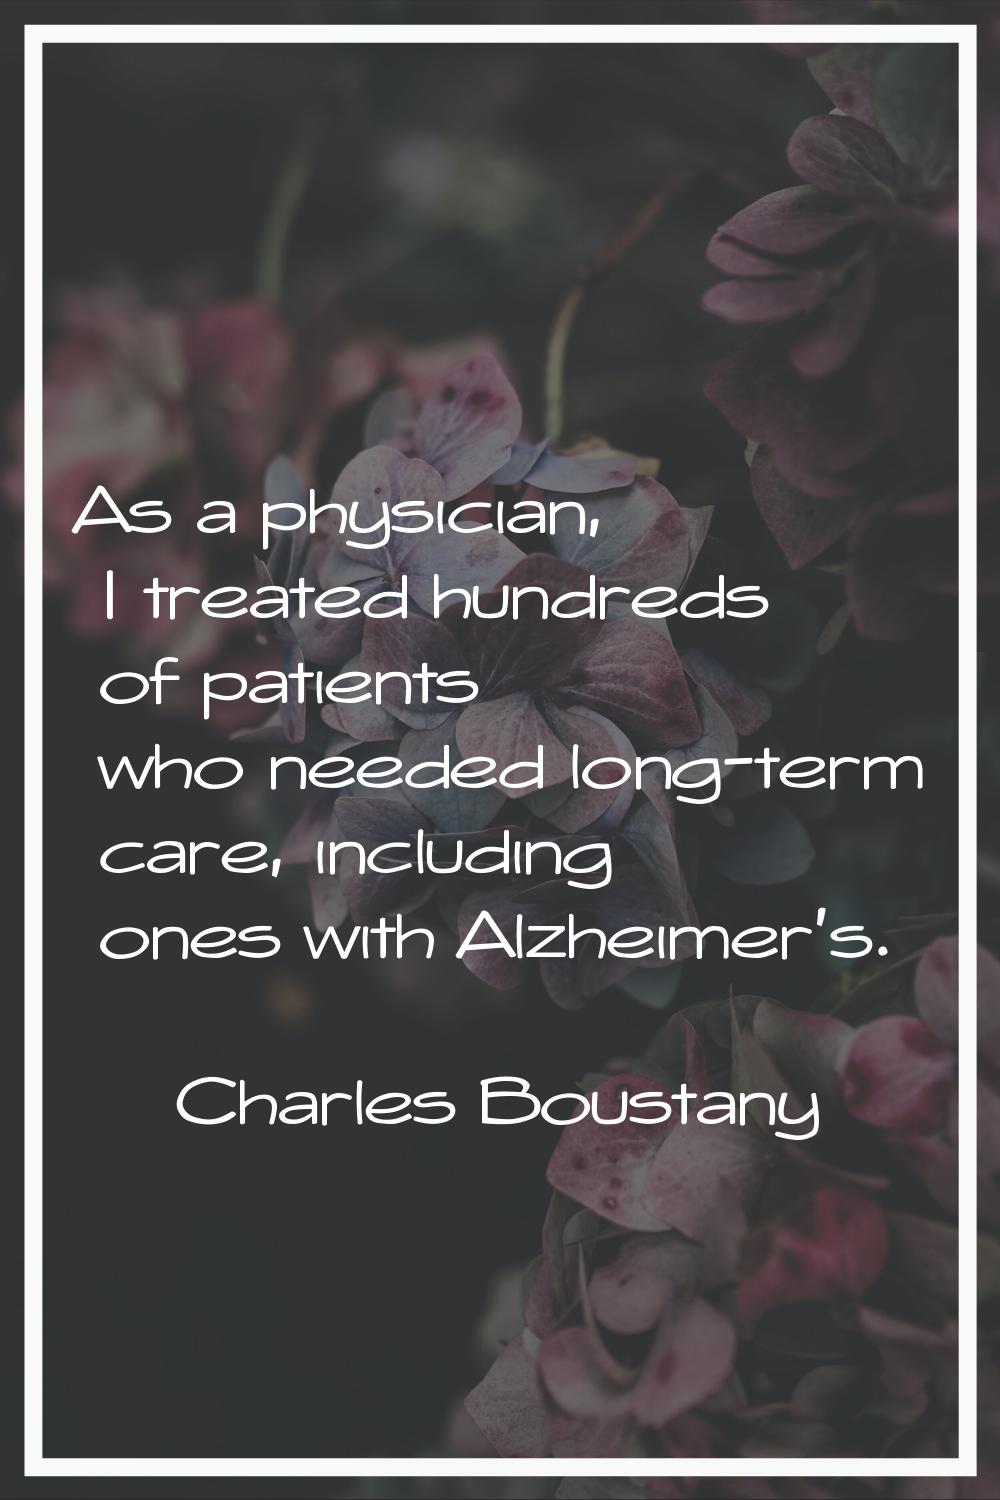 As a physician, I treated hundreds of patients who needed long-term care, including ones with Alzhe